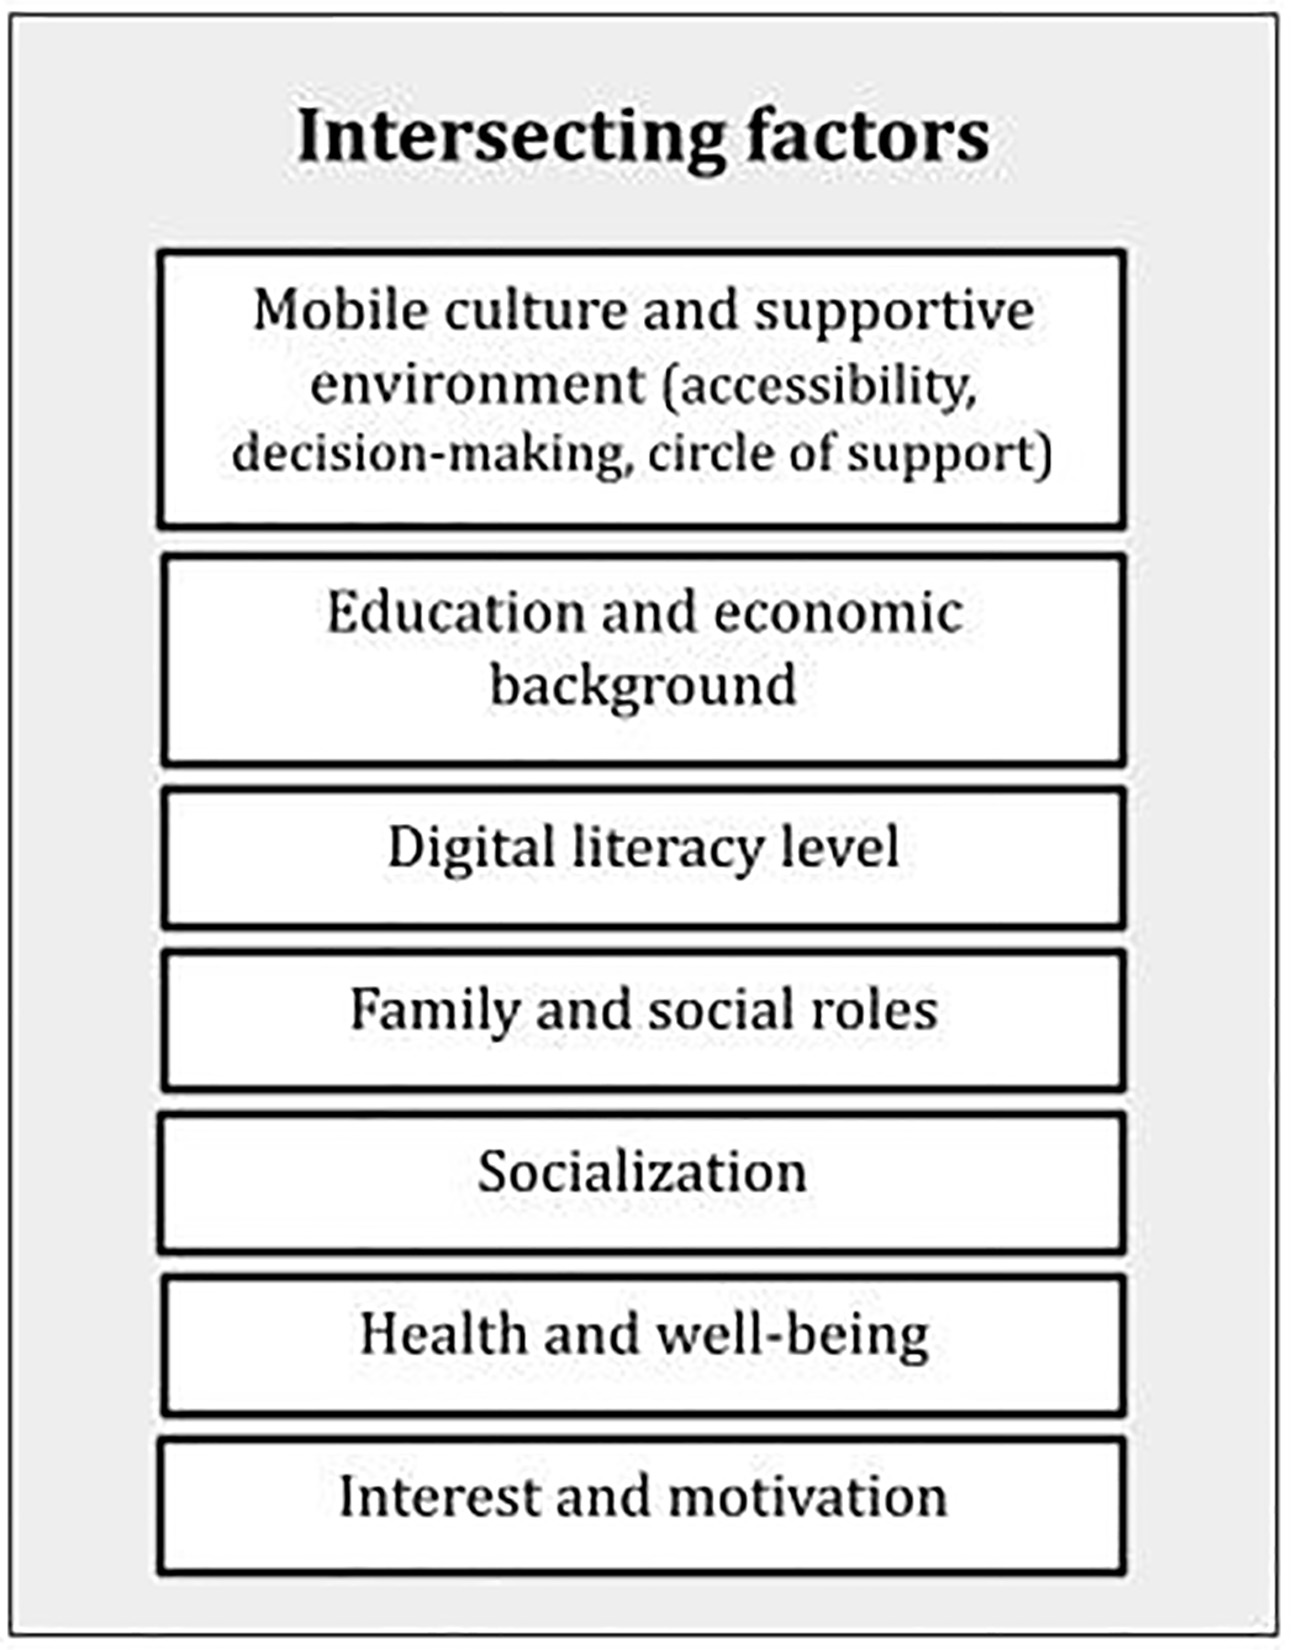 Intersectionality Lens to Female Elderly's Mobile Usage Experience under COVID-19: An Intimate or Intimidating Relationship?